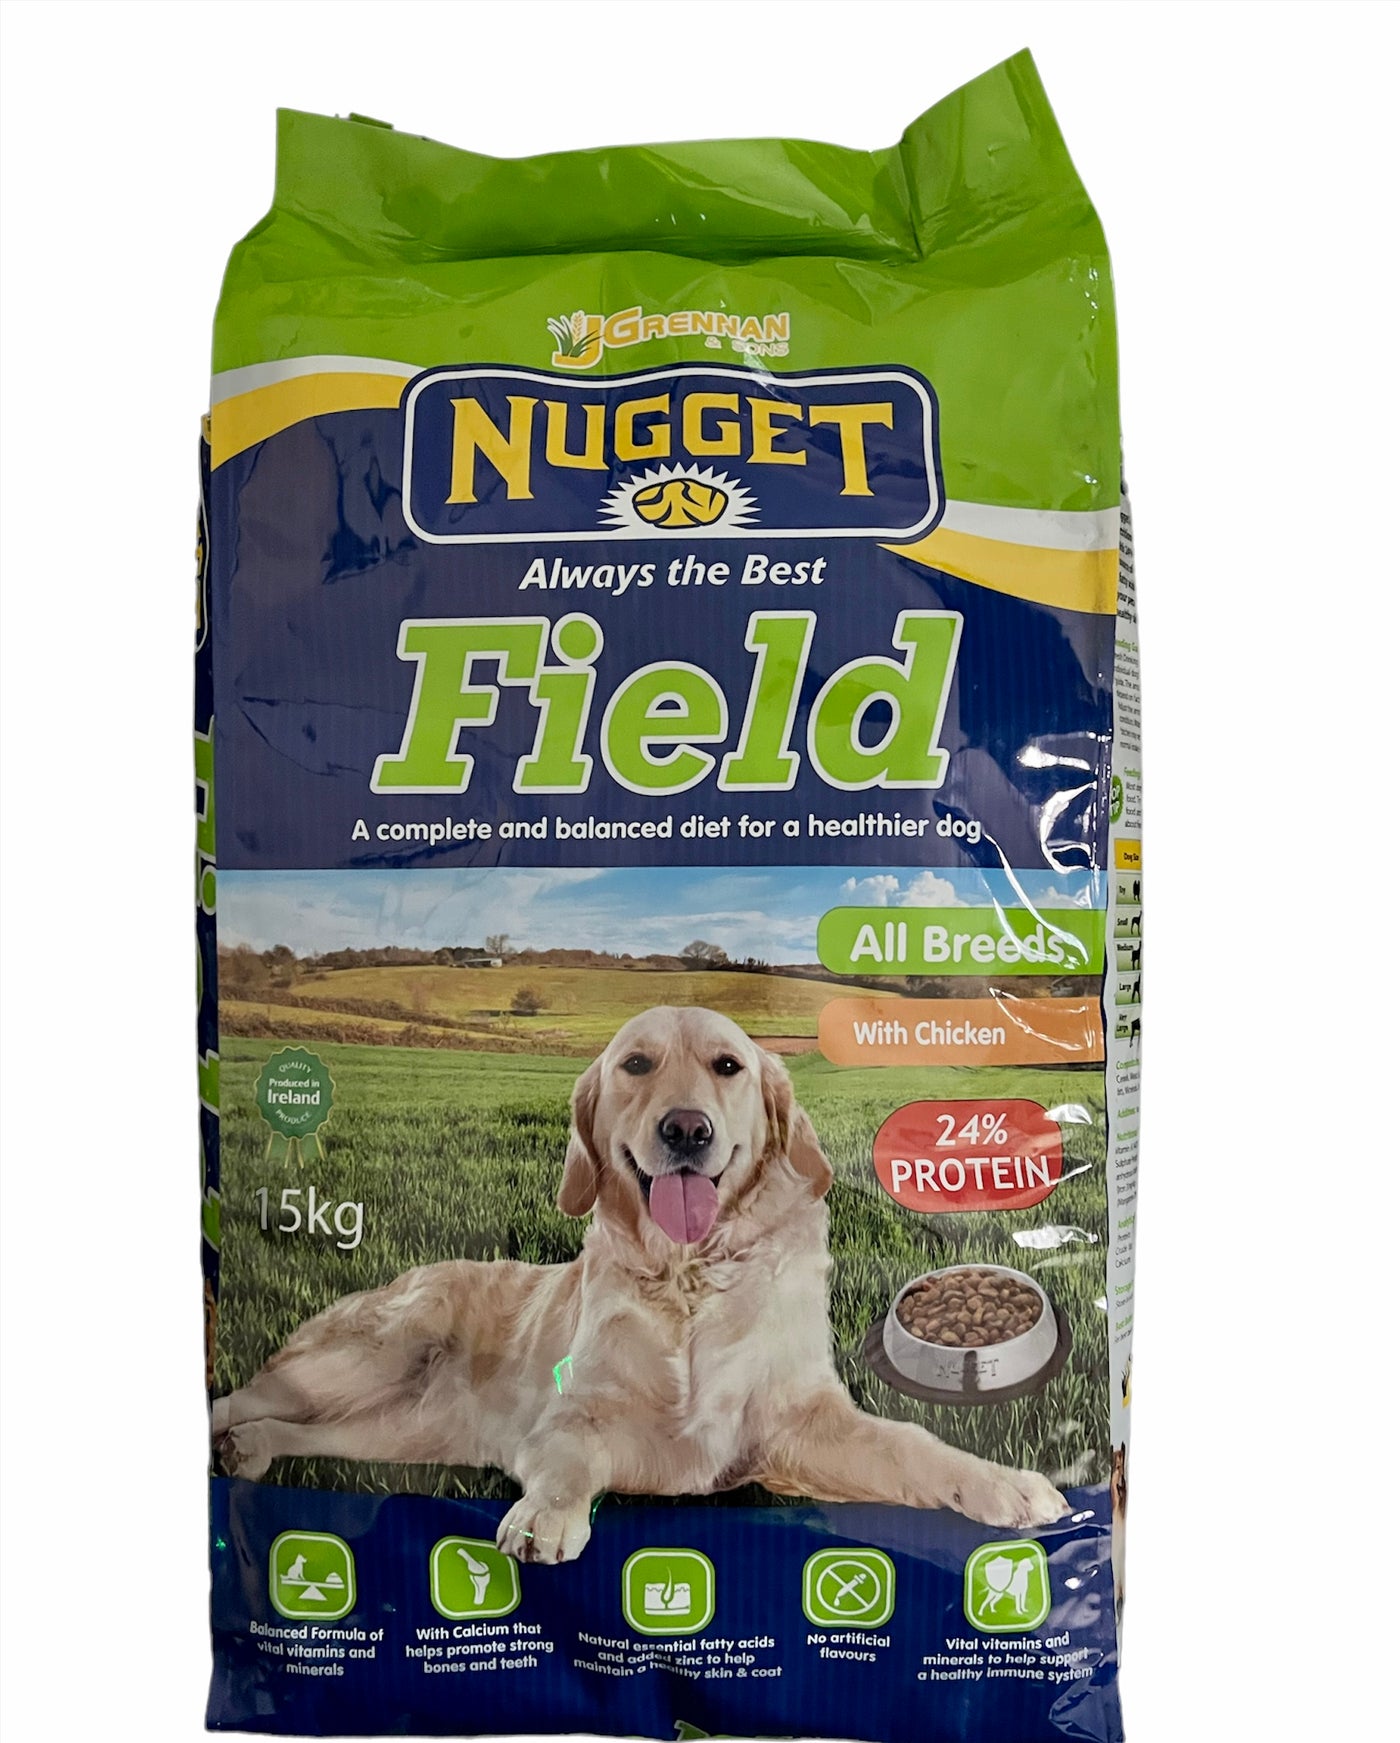 NUGGET FIELD DOGFOOD